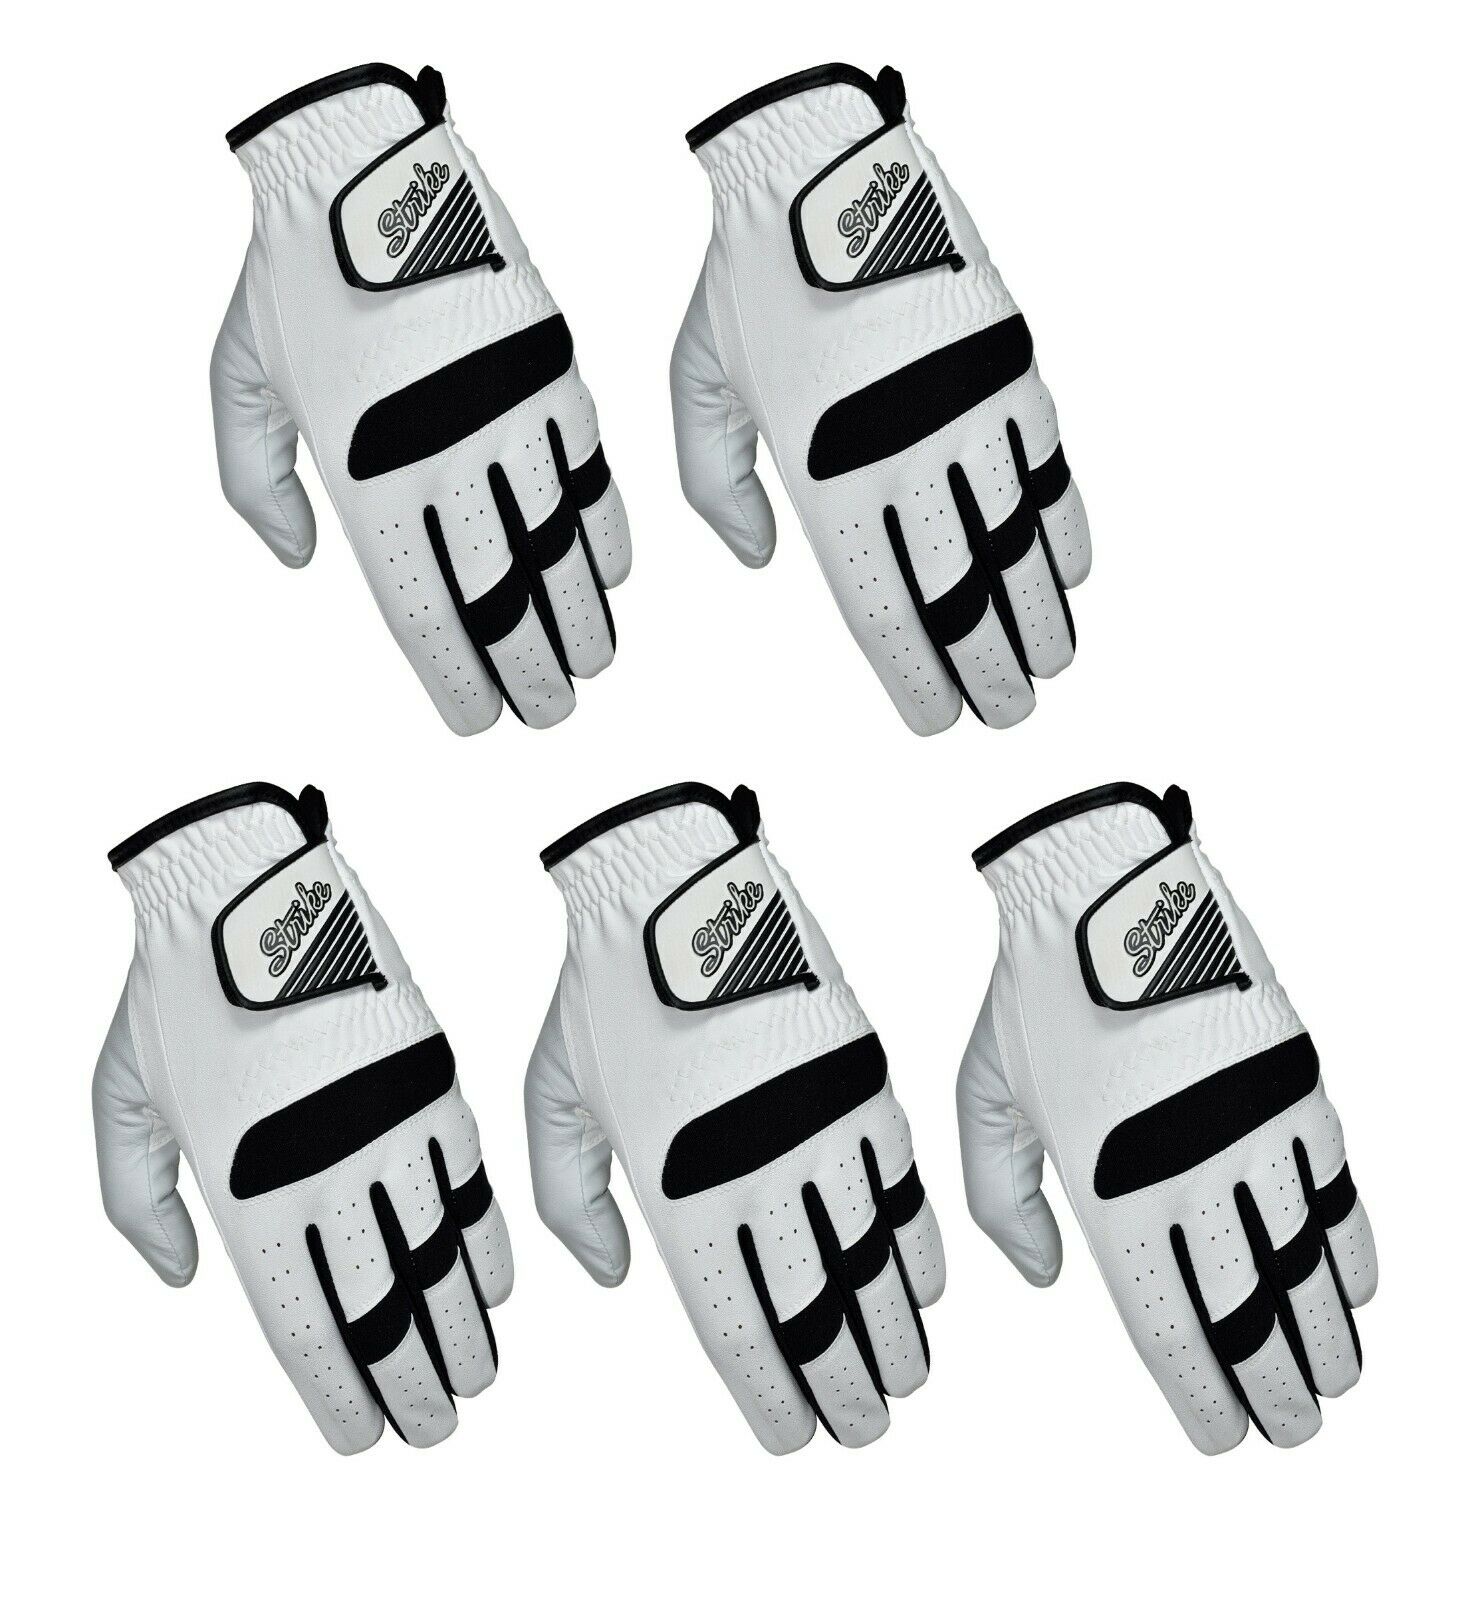 Sg Pack Of 5 Men All Weather Golf Gloves Cabretta Leather Palm Patch And Thumb